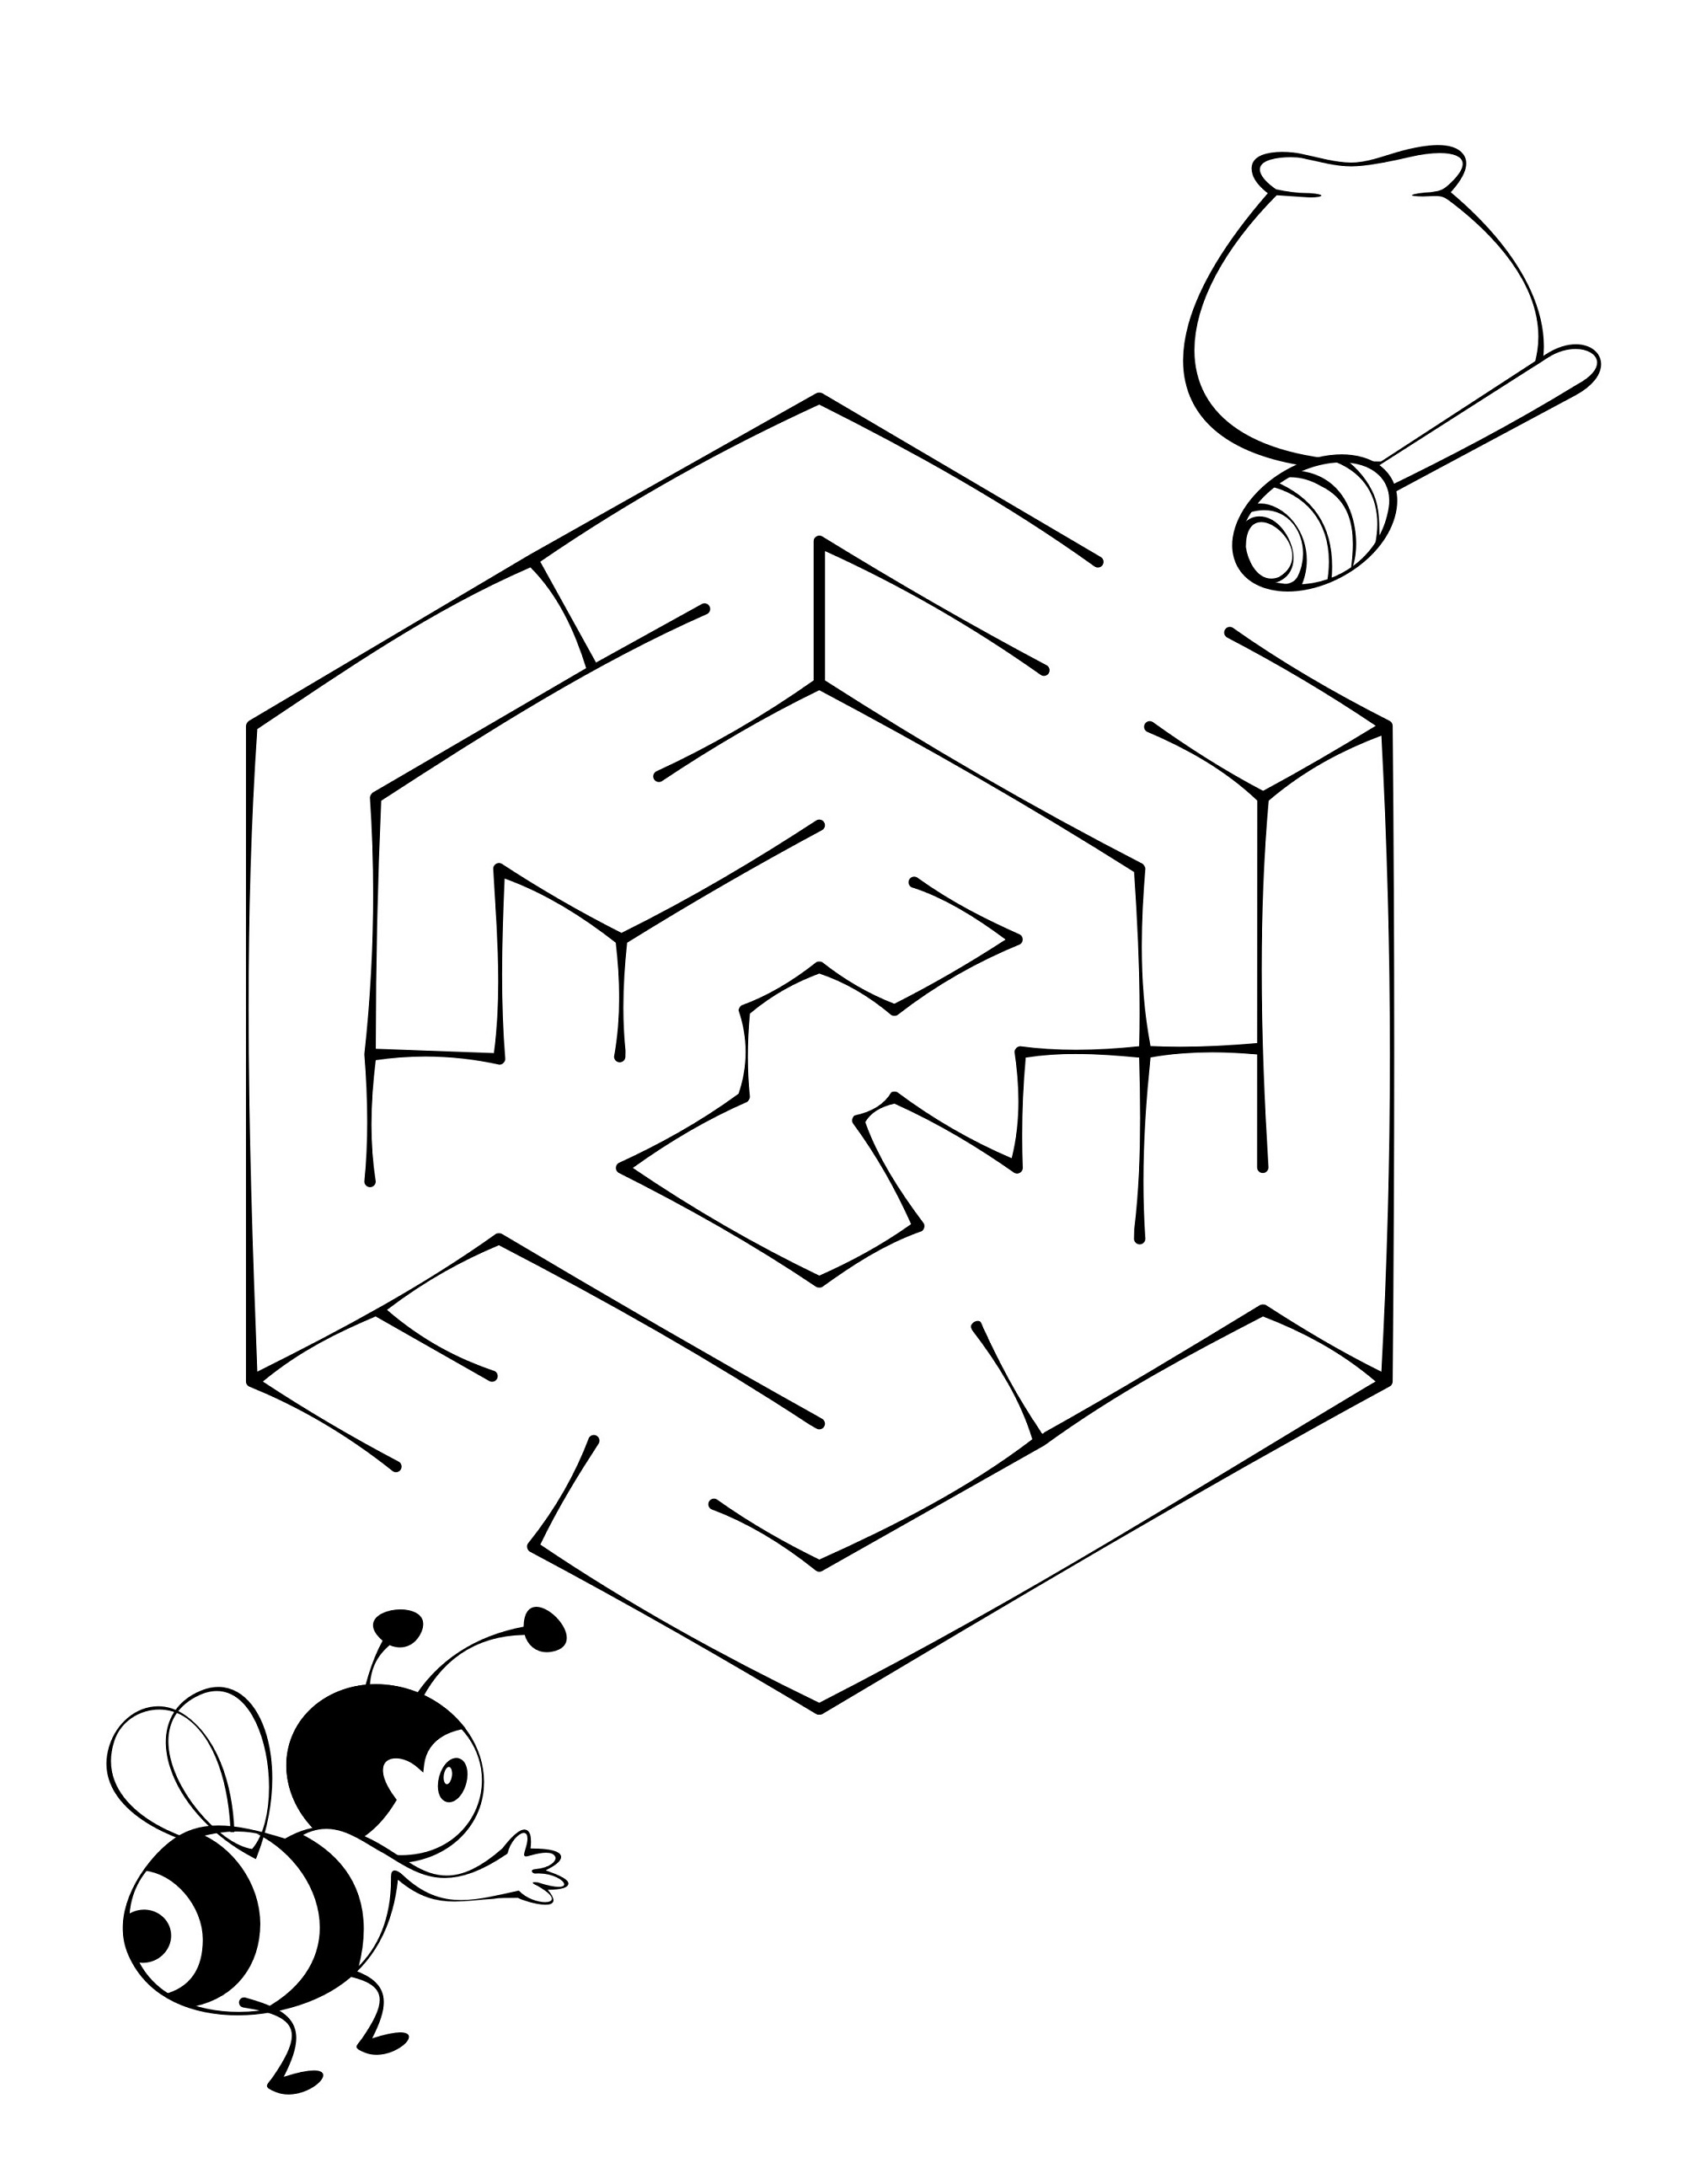 Maze Puzzle For Kids To Print | Kiddo Shelter - Printable Labyrinth Puzzles